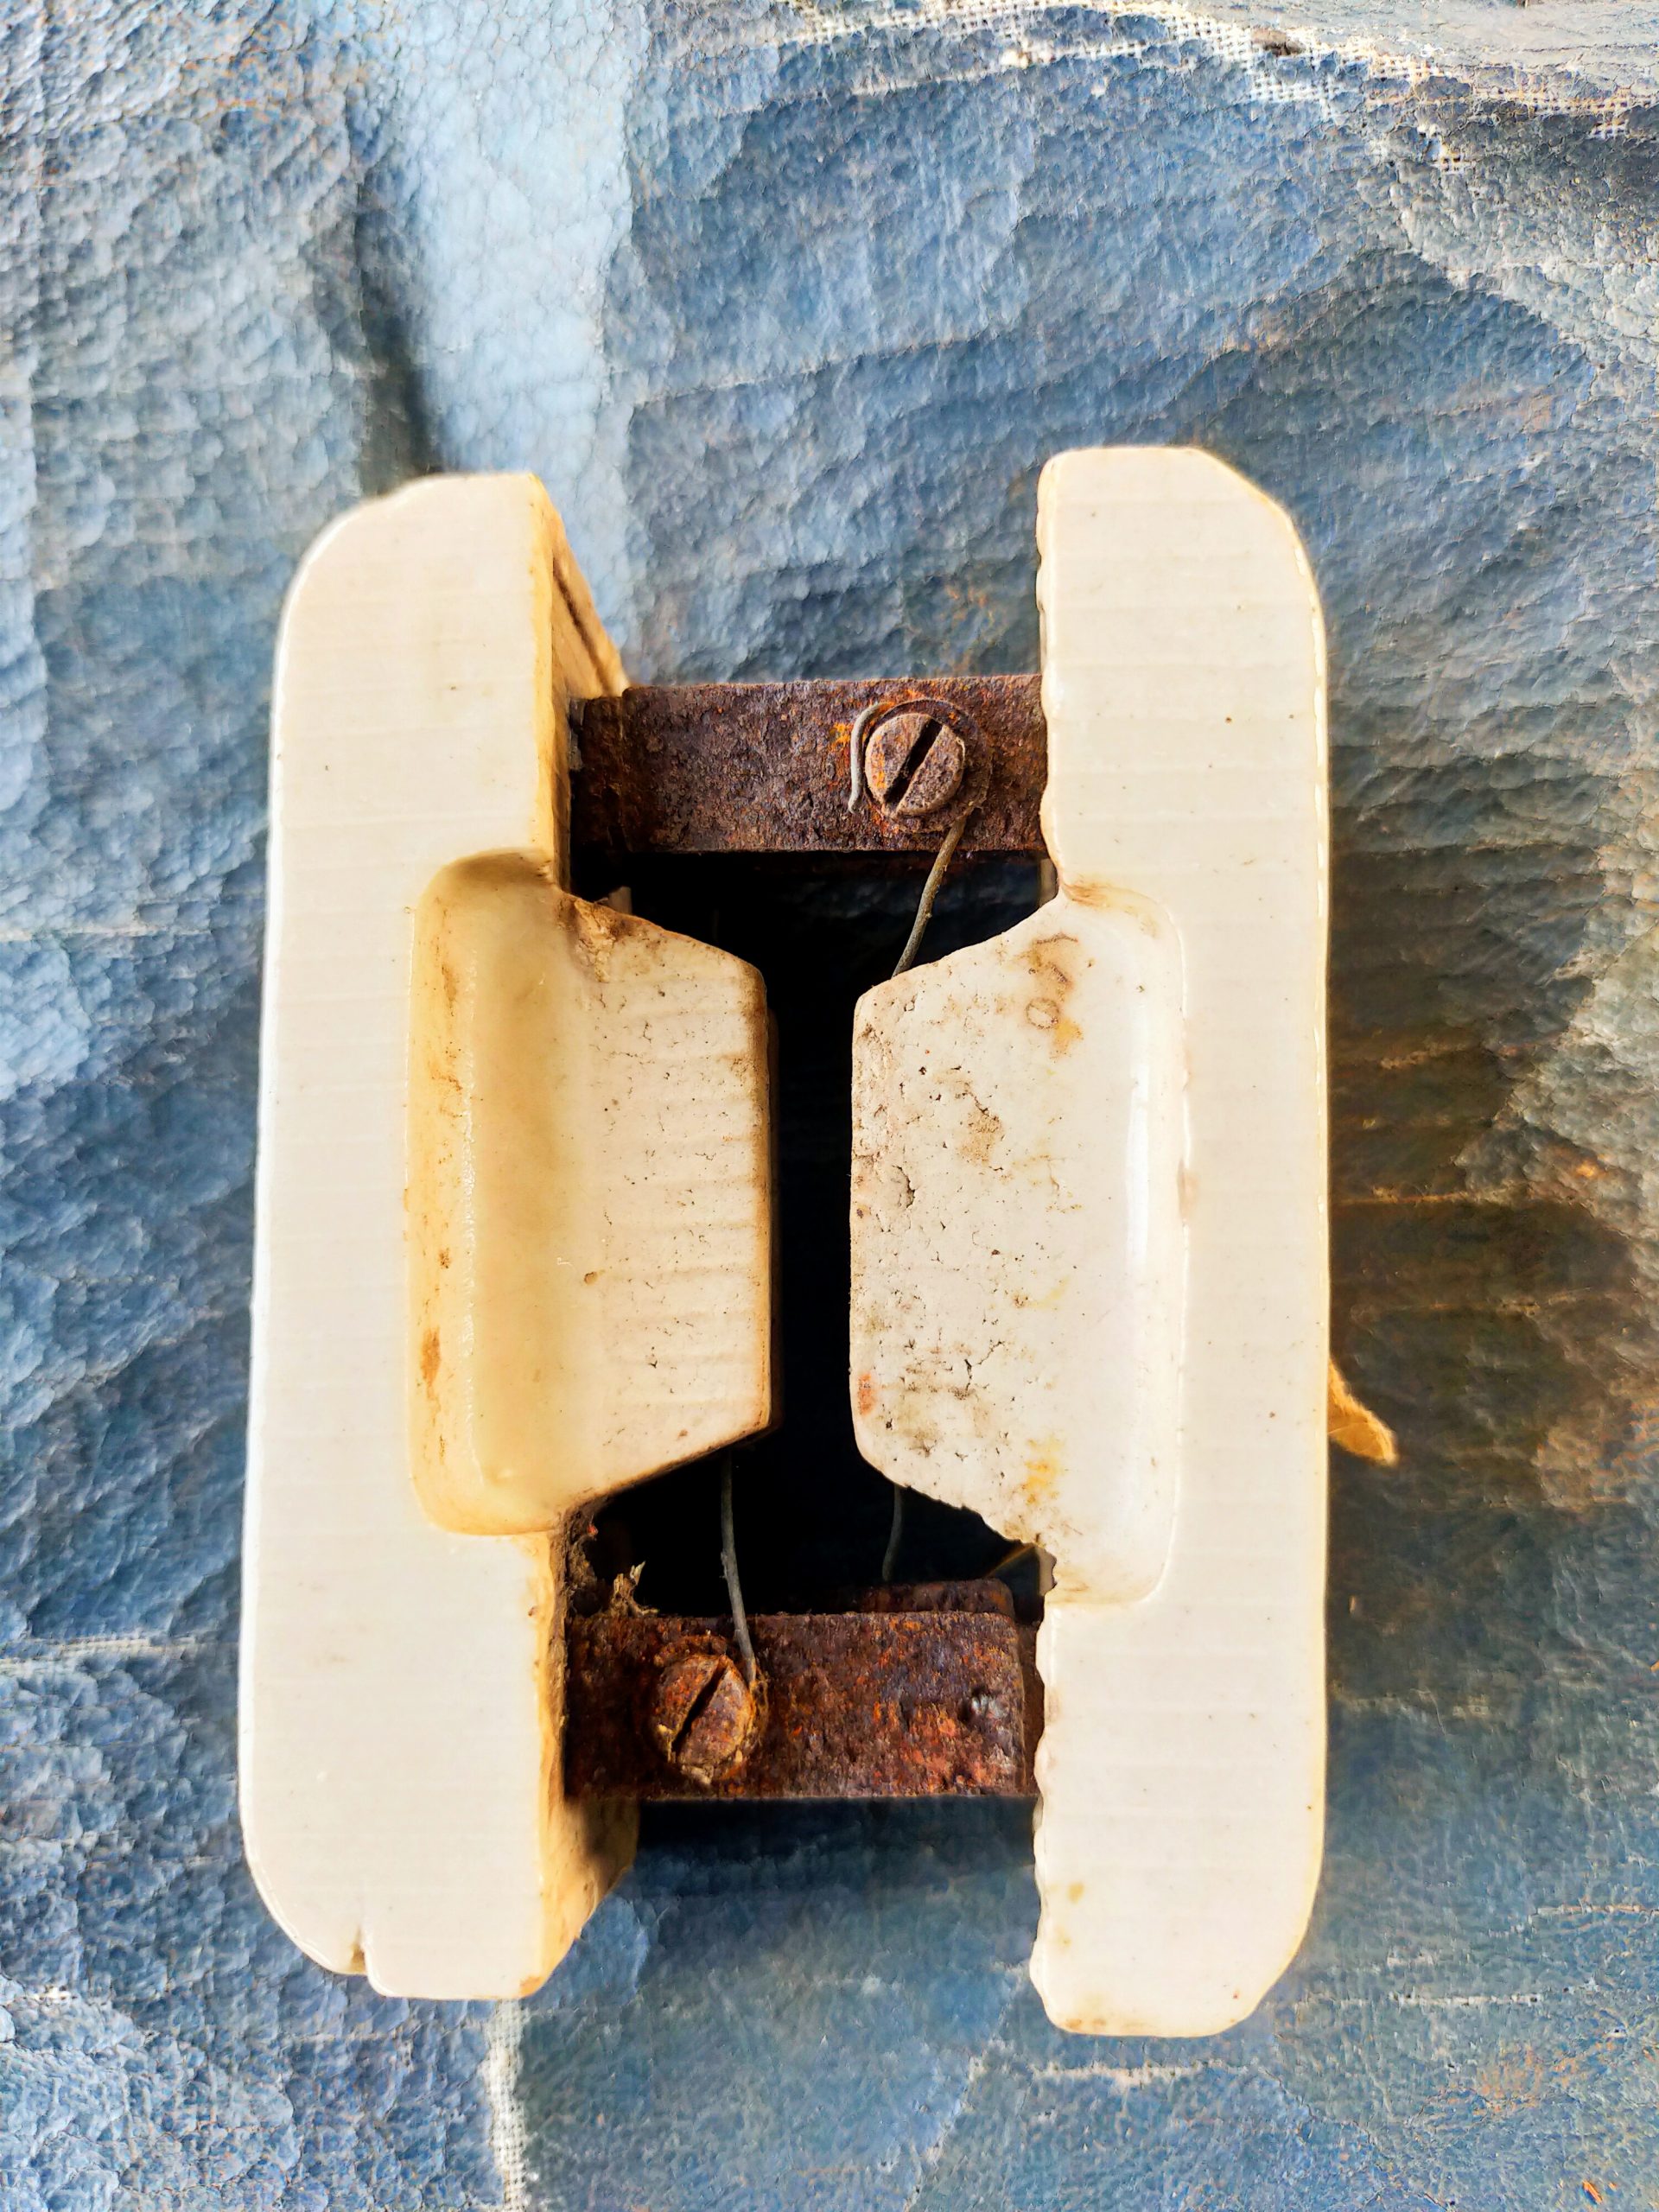 An old electrical fuse